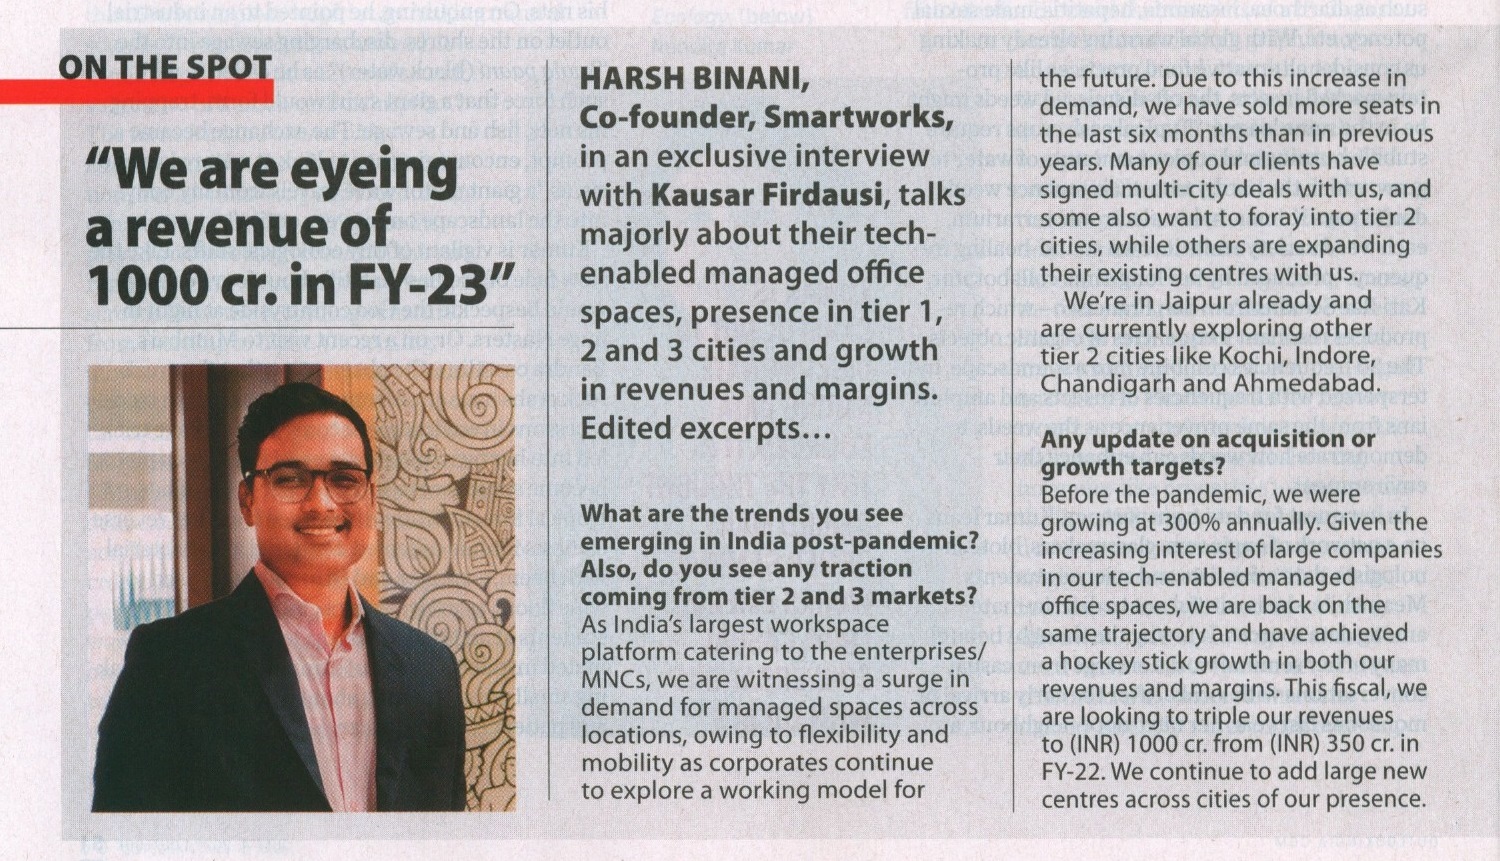 "We are eyeing a revenue of 1000 cr. in FY-23" - Harsh Binani, Co-founder- Smartworks